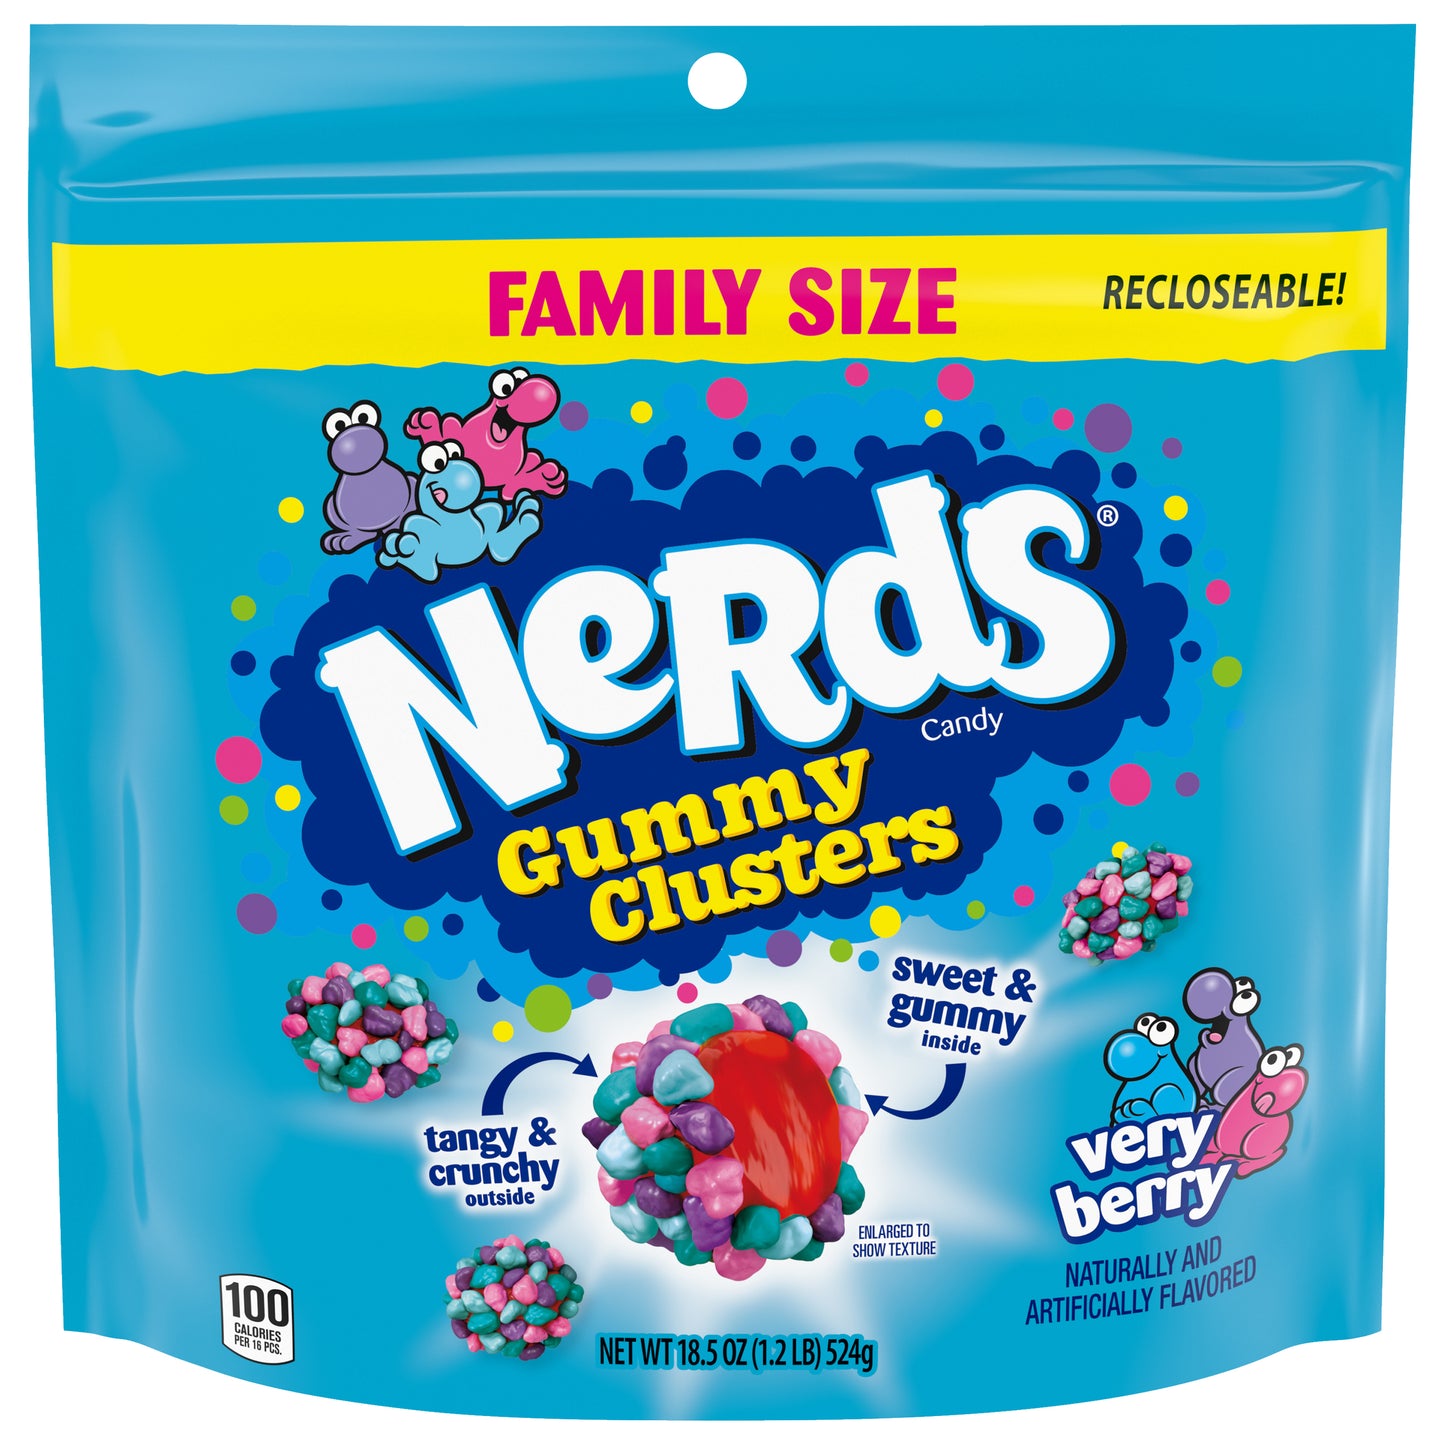 Nerds Gummy Clusters Very Berry Stand Up Bag 18.5oz 5ct